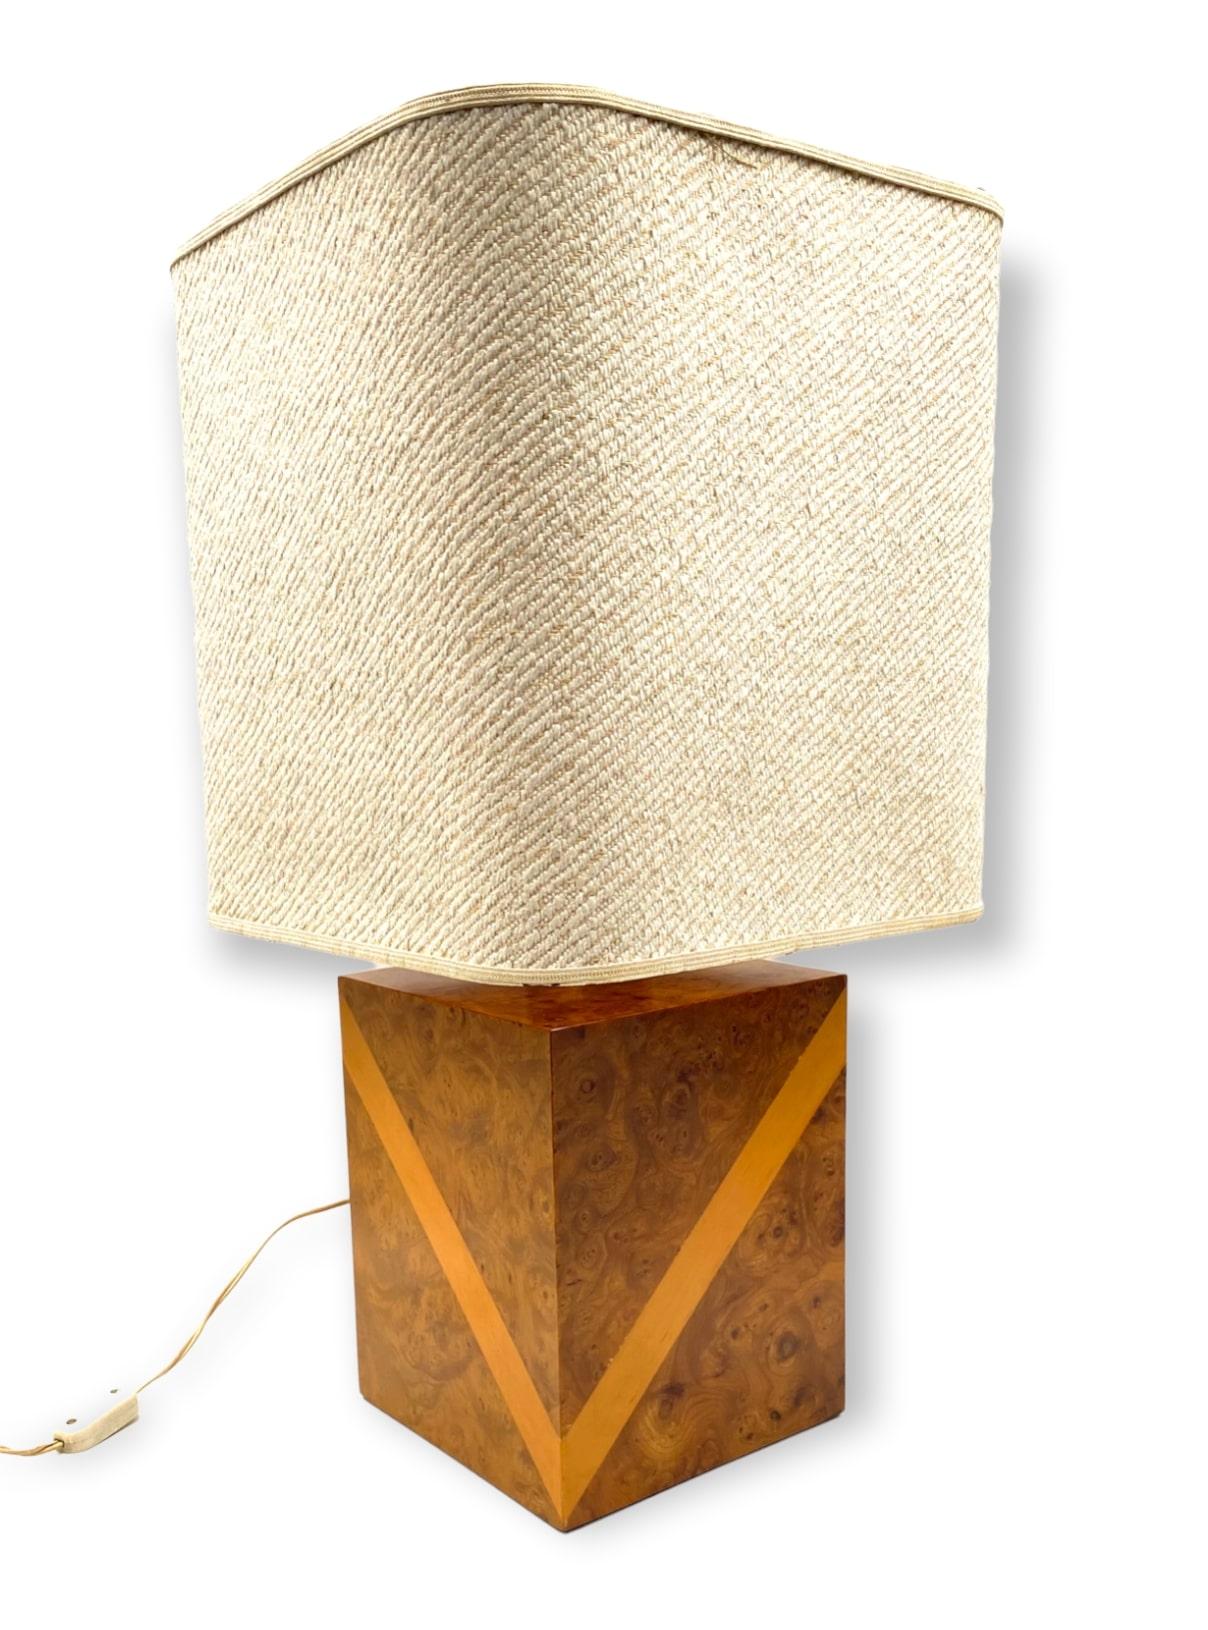 Hollywood Regency Cubic Wood and Brass Table Lamp, Italy, 1970s For Sale 10